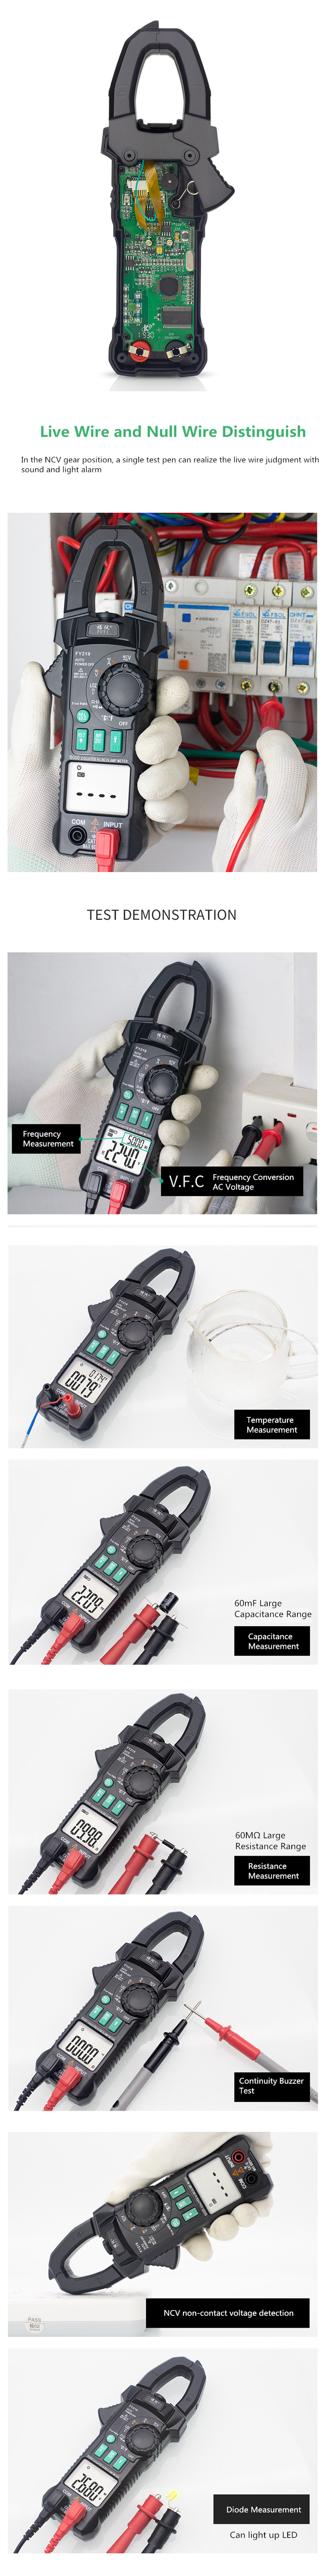 FUYI-FY219-Double-Display-ACDC-True-RMS-Digital-Clamp-Meter-Portable-Multimeter-Voltage-Current-Mete-1627563-3